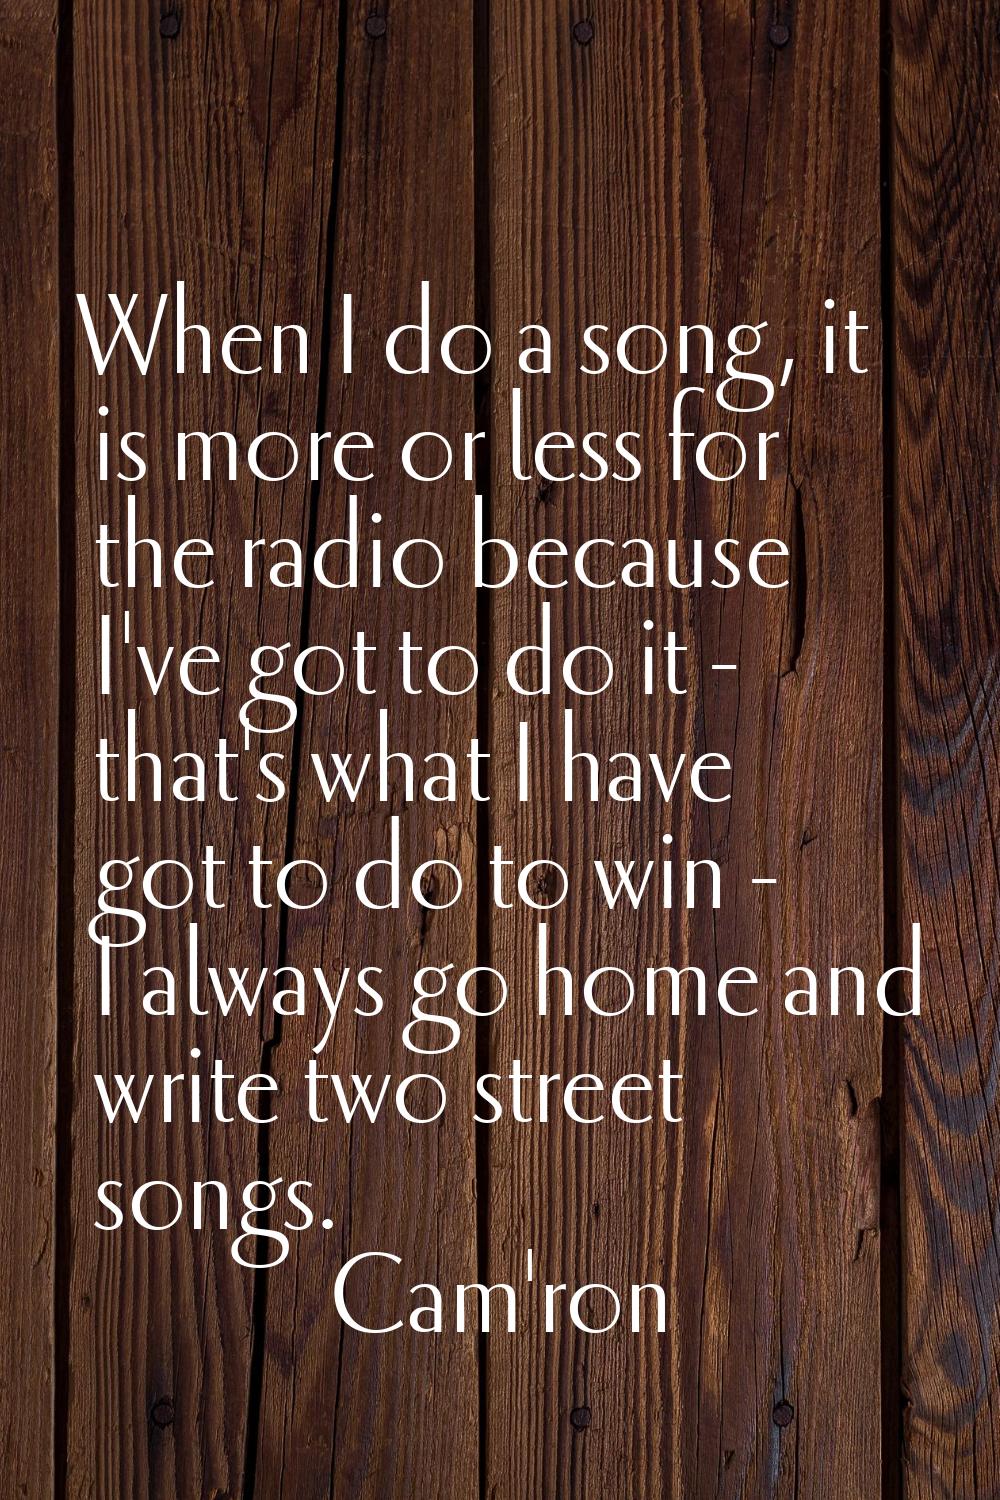 When I do a song, it is more or less for the radio because I've got to do it - that's what I have g